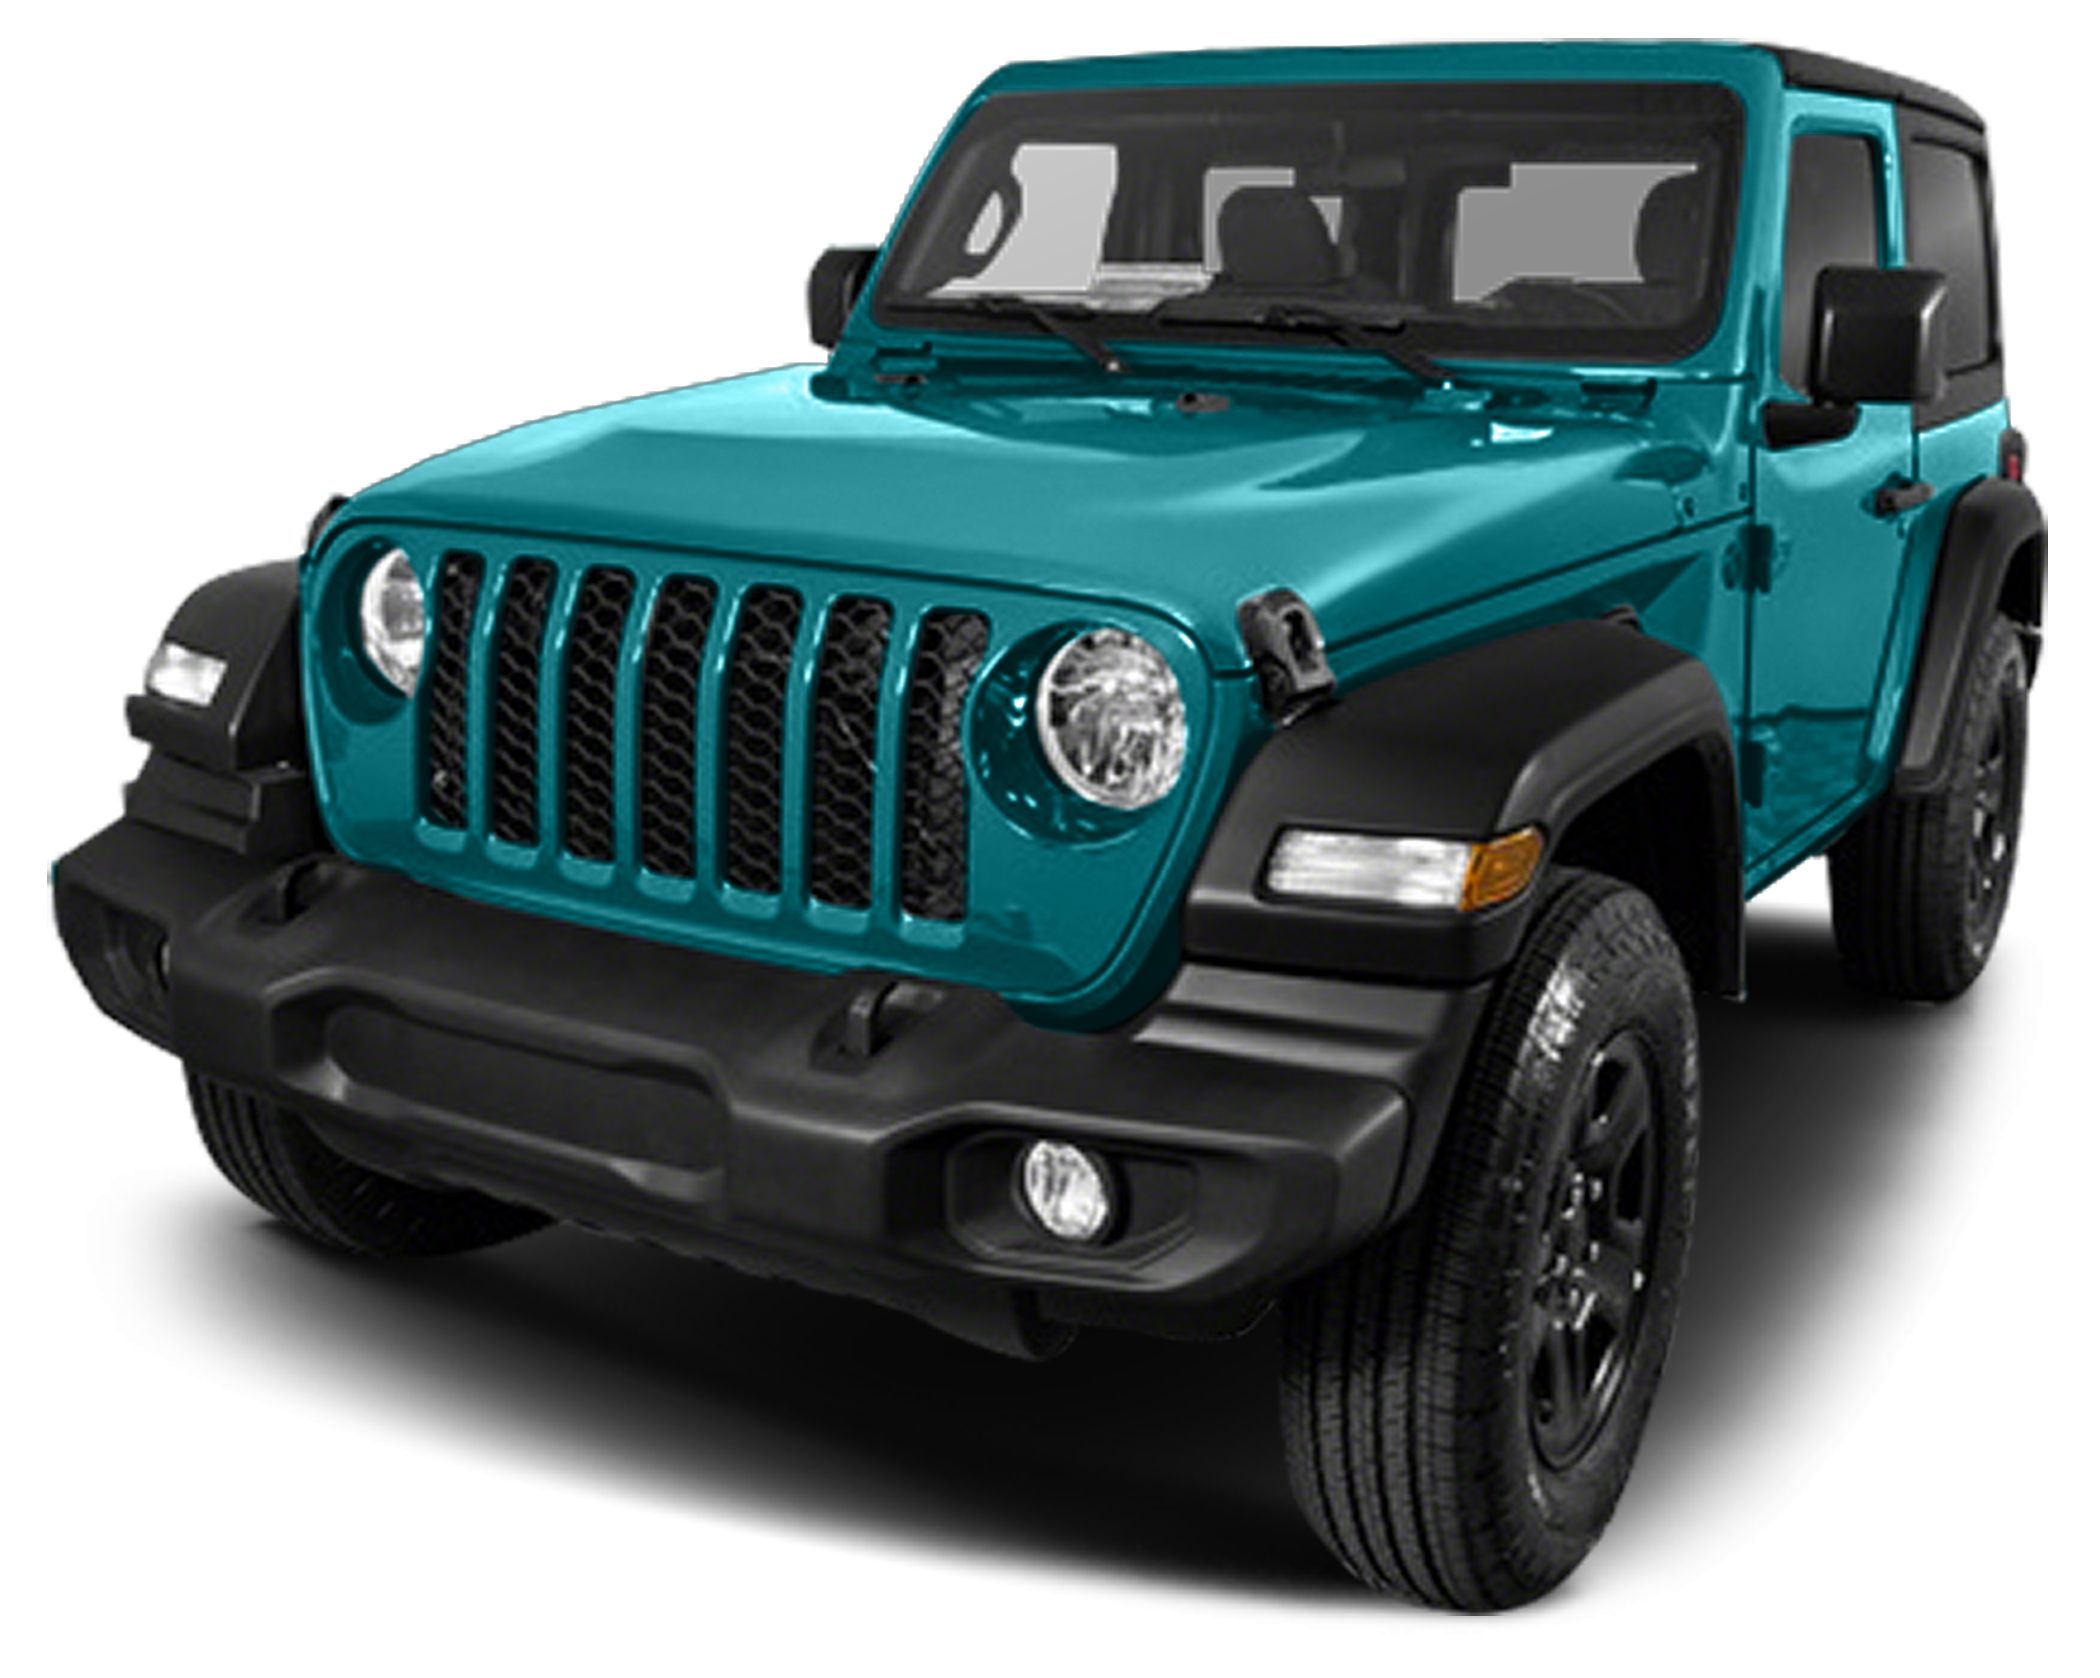 2024 Jeep Wrangler Review, Pricing, & Pictures